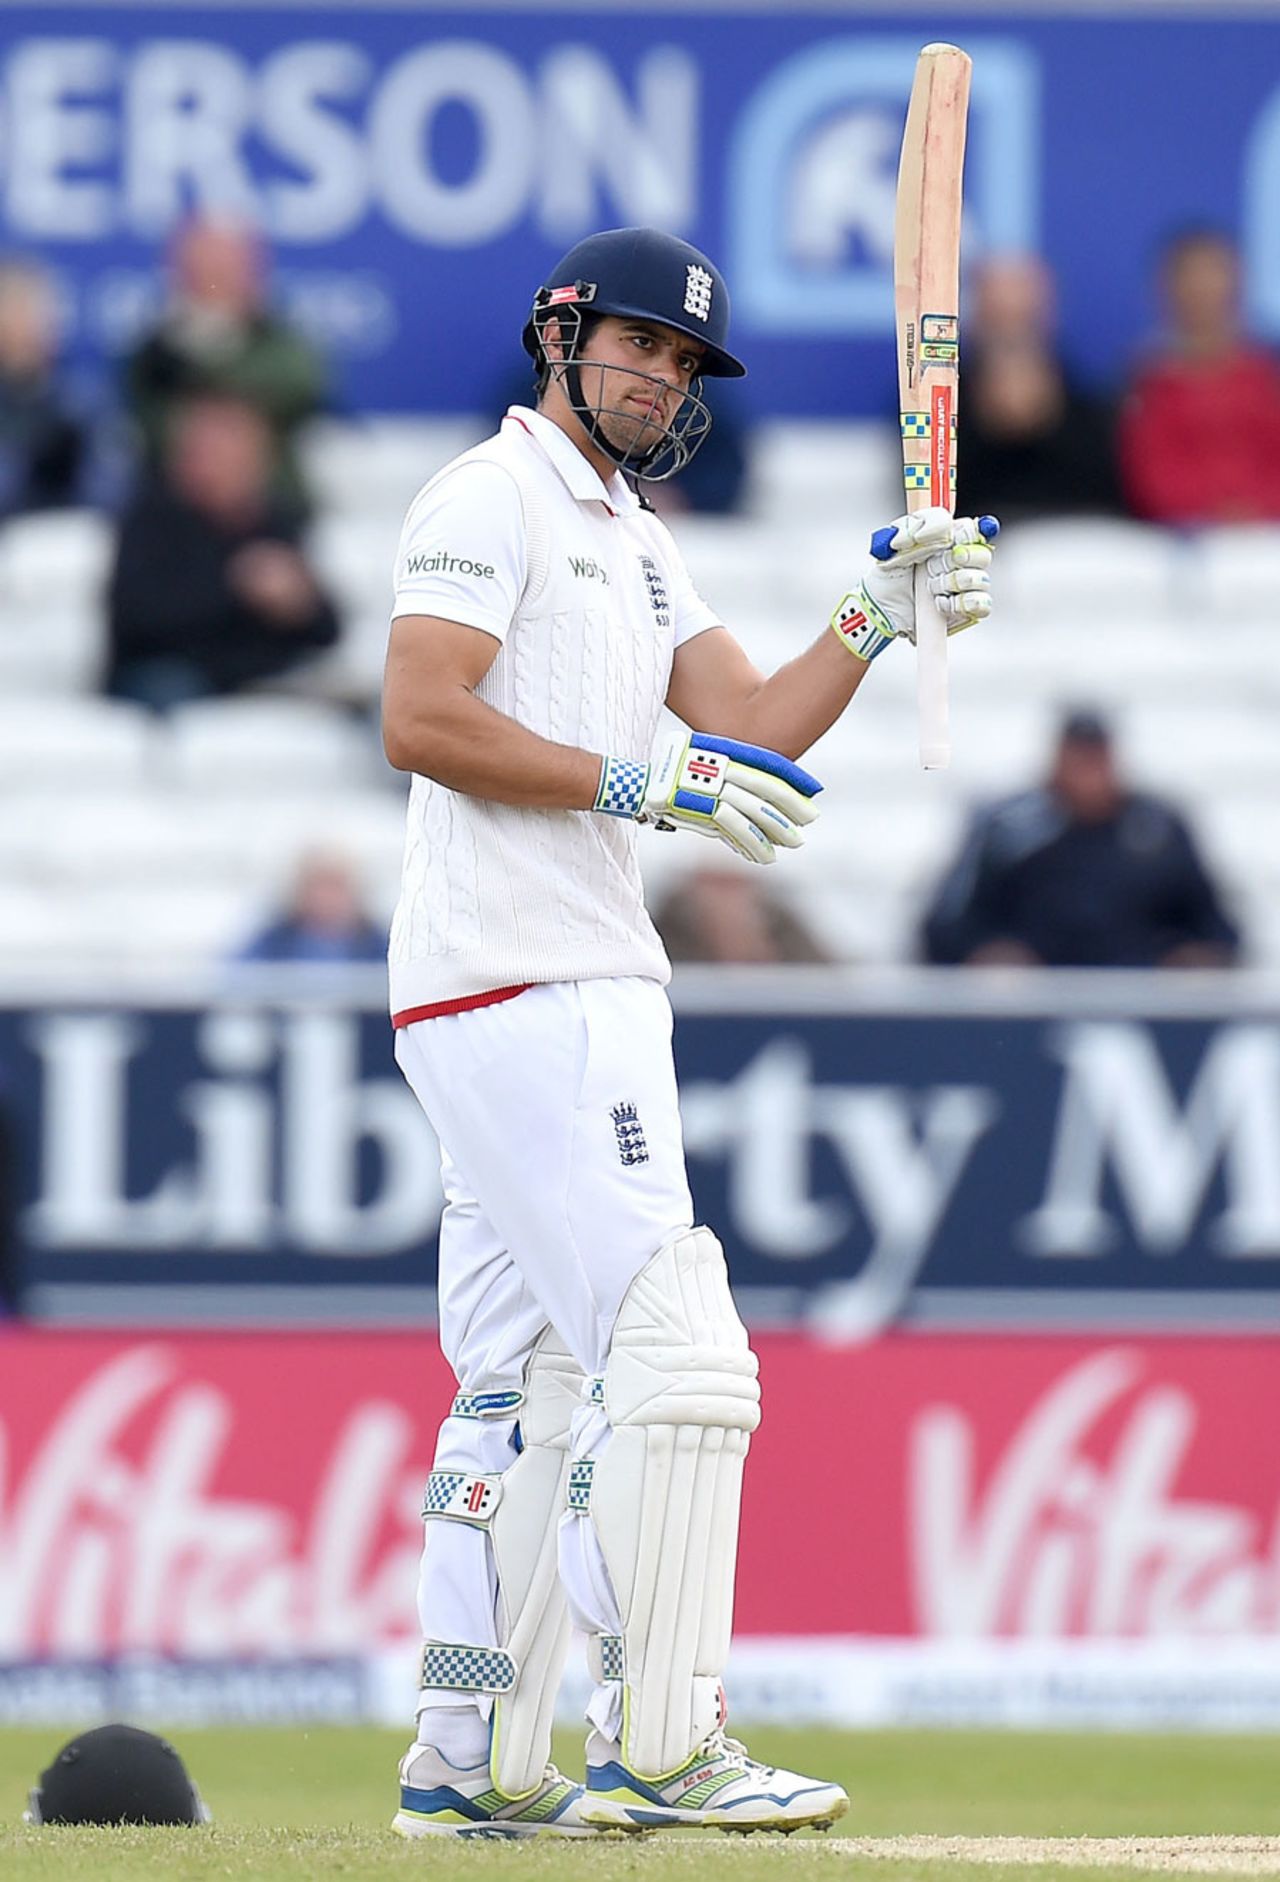 Alastair Cook reached his half-century and went on to 9000 runs in Tests, England v New Zealand, 2nd Investec Test, Headingley, 5th day, June 2, 2015